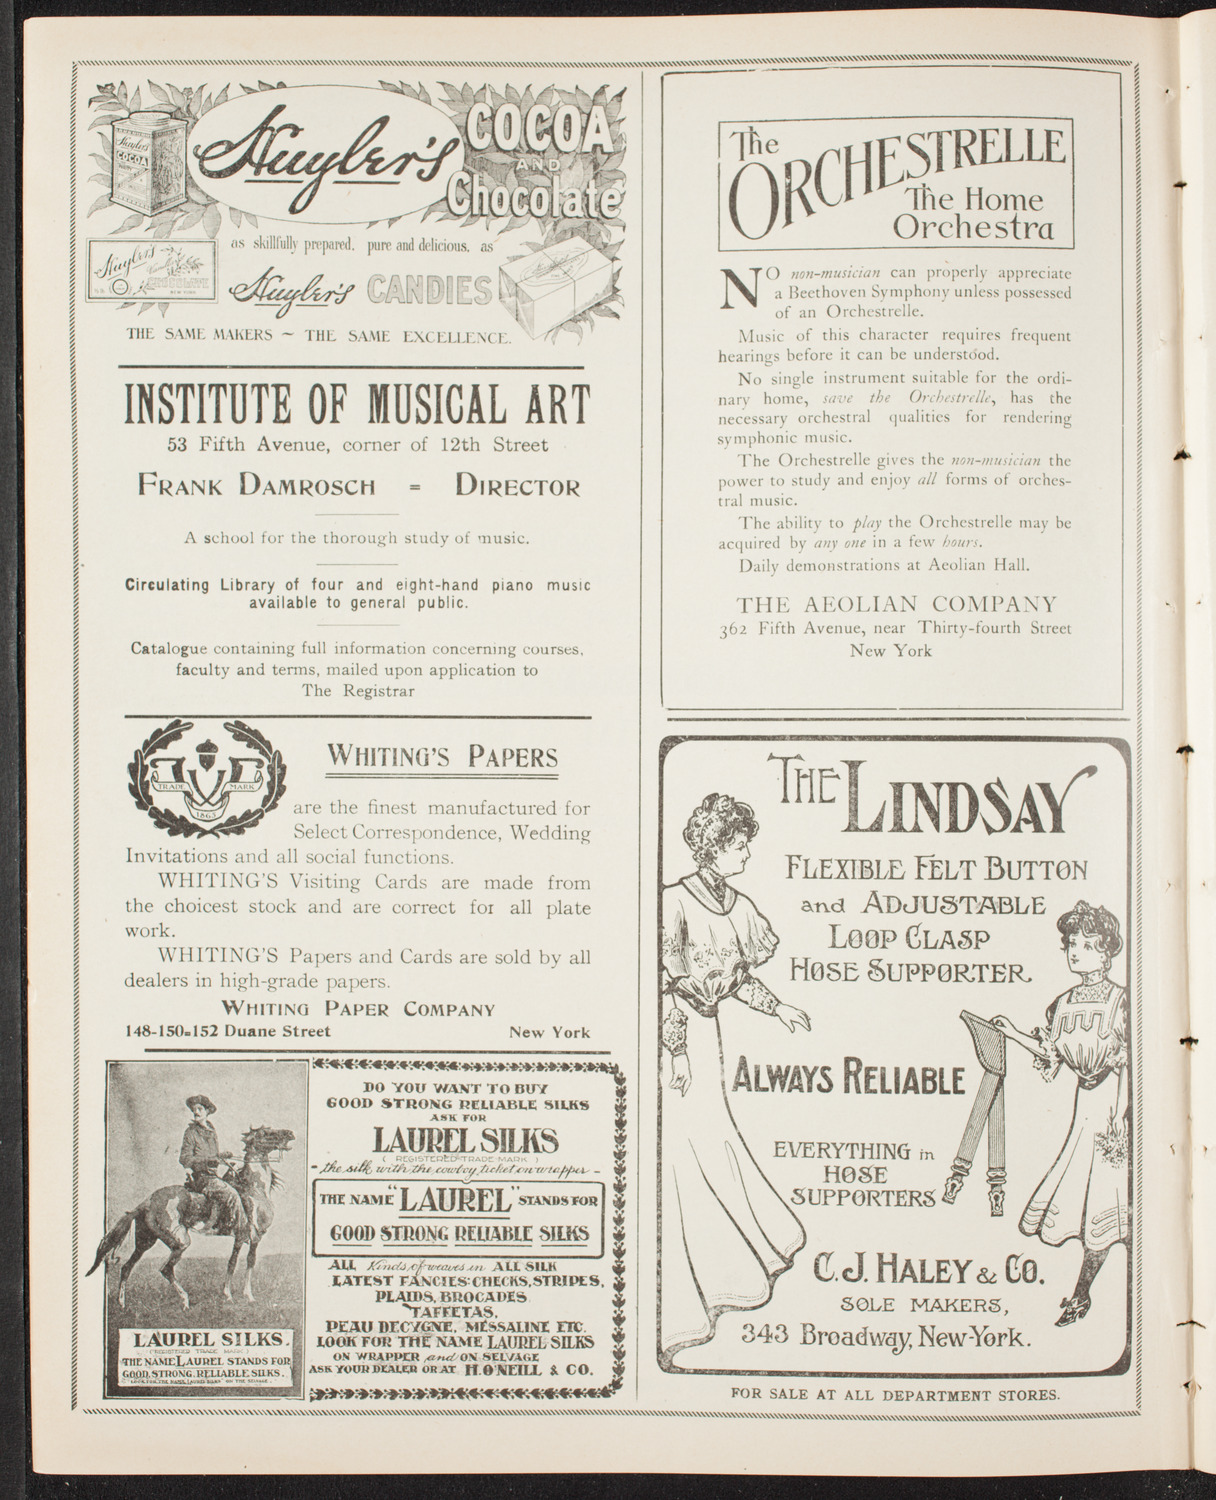 Graduation: Packard Commercial School, May 20, 1907, program page 6